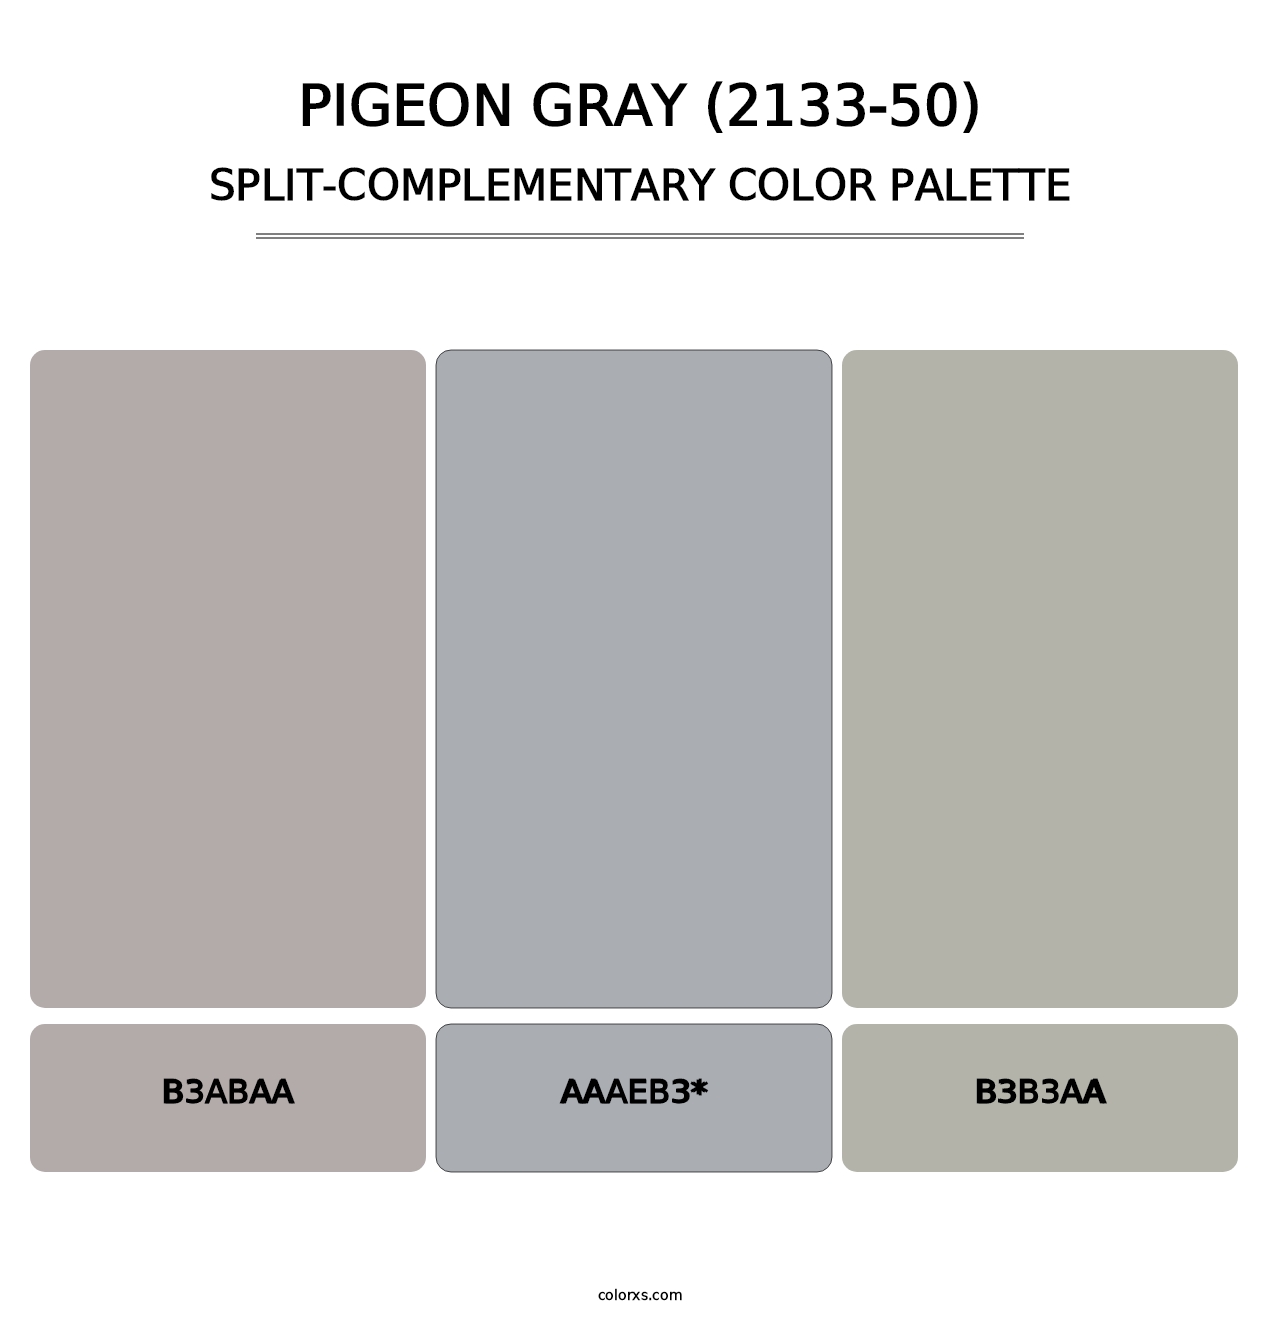 Pigeon Gray (2133-50) - Split-Complementary Color Palette